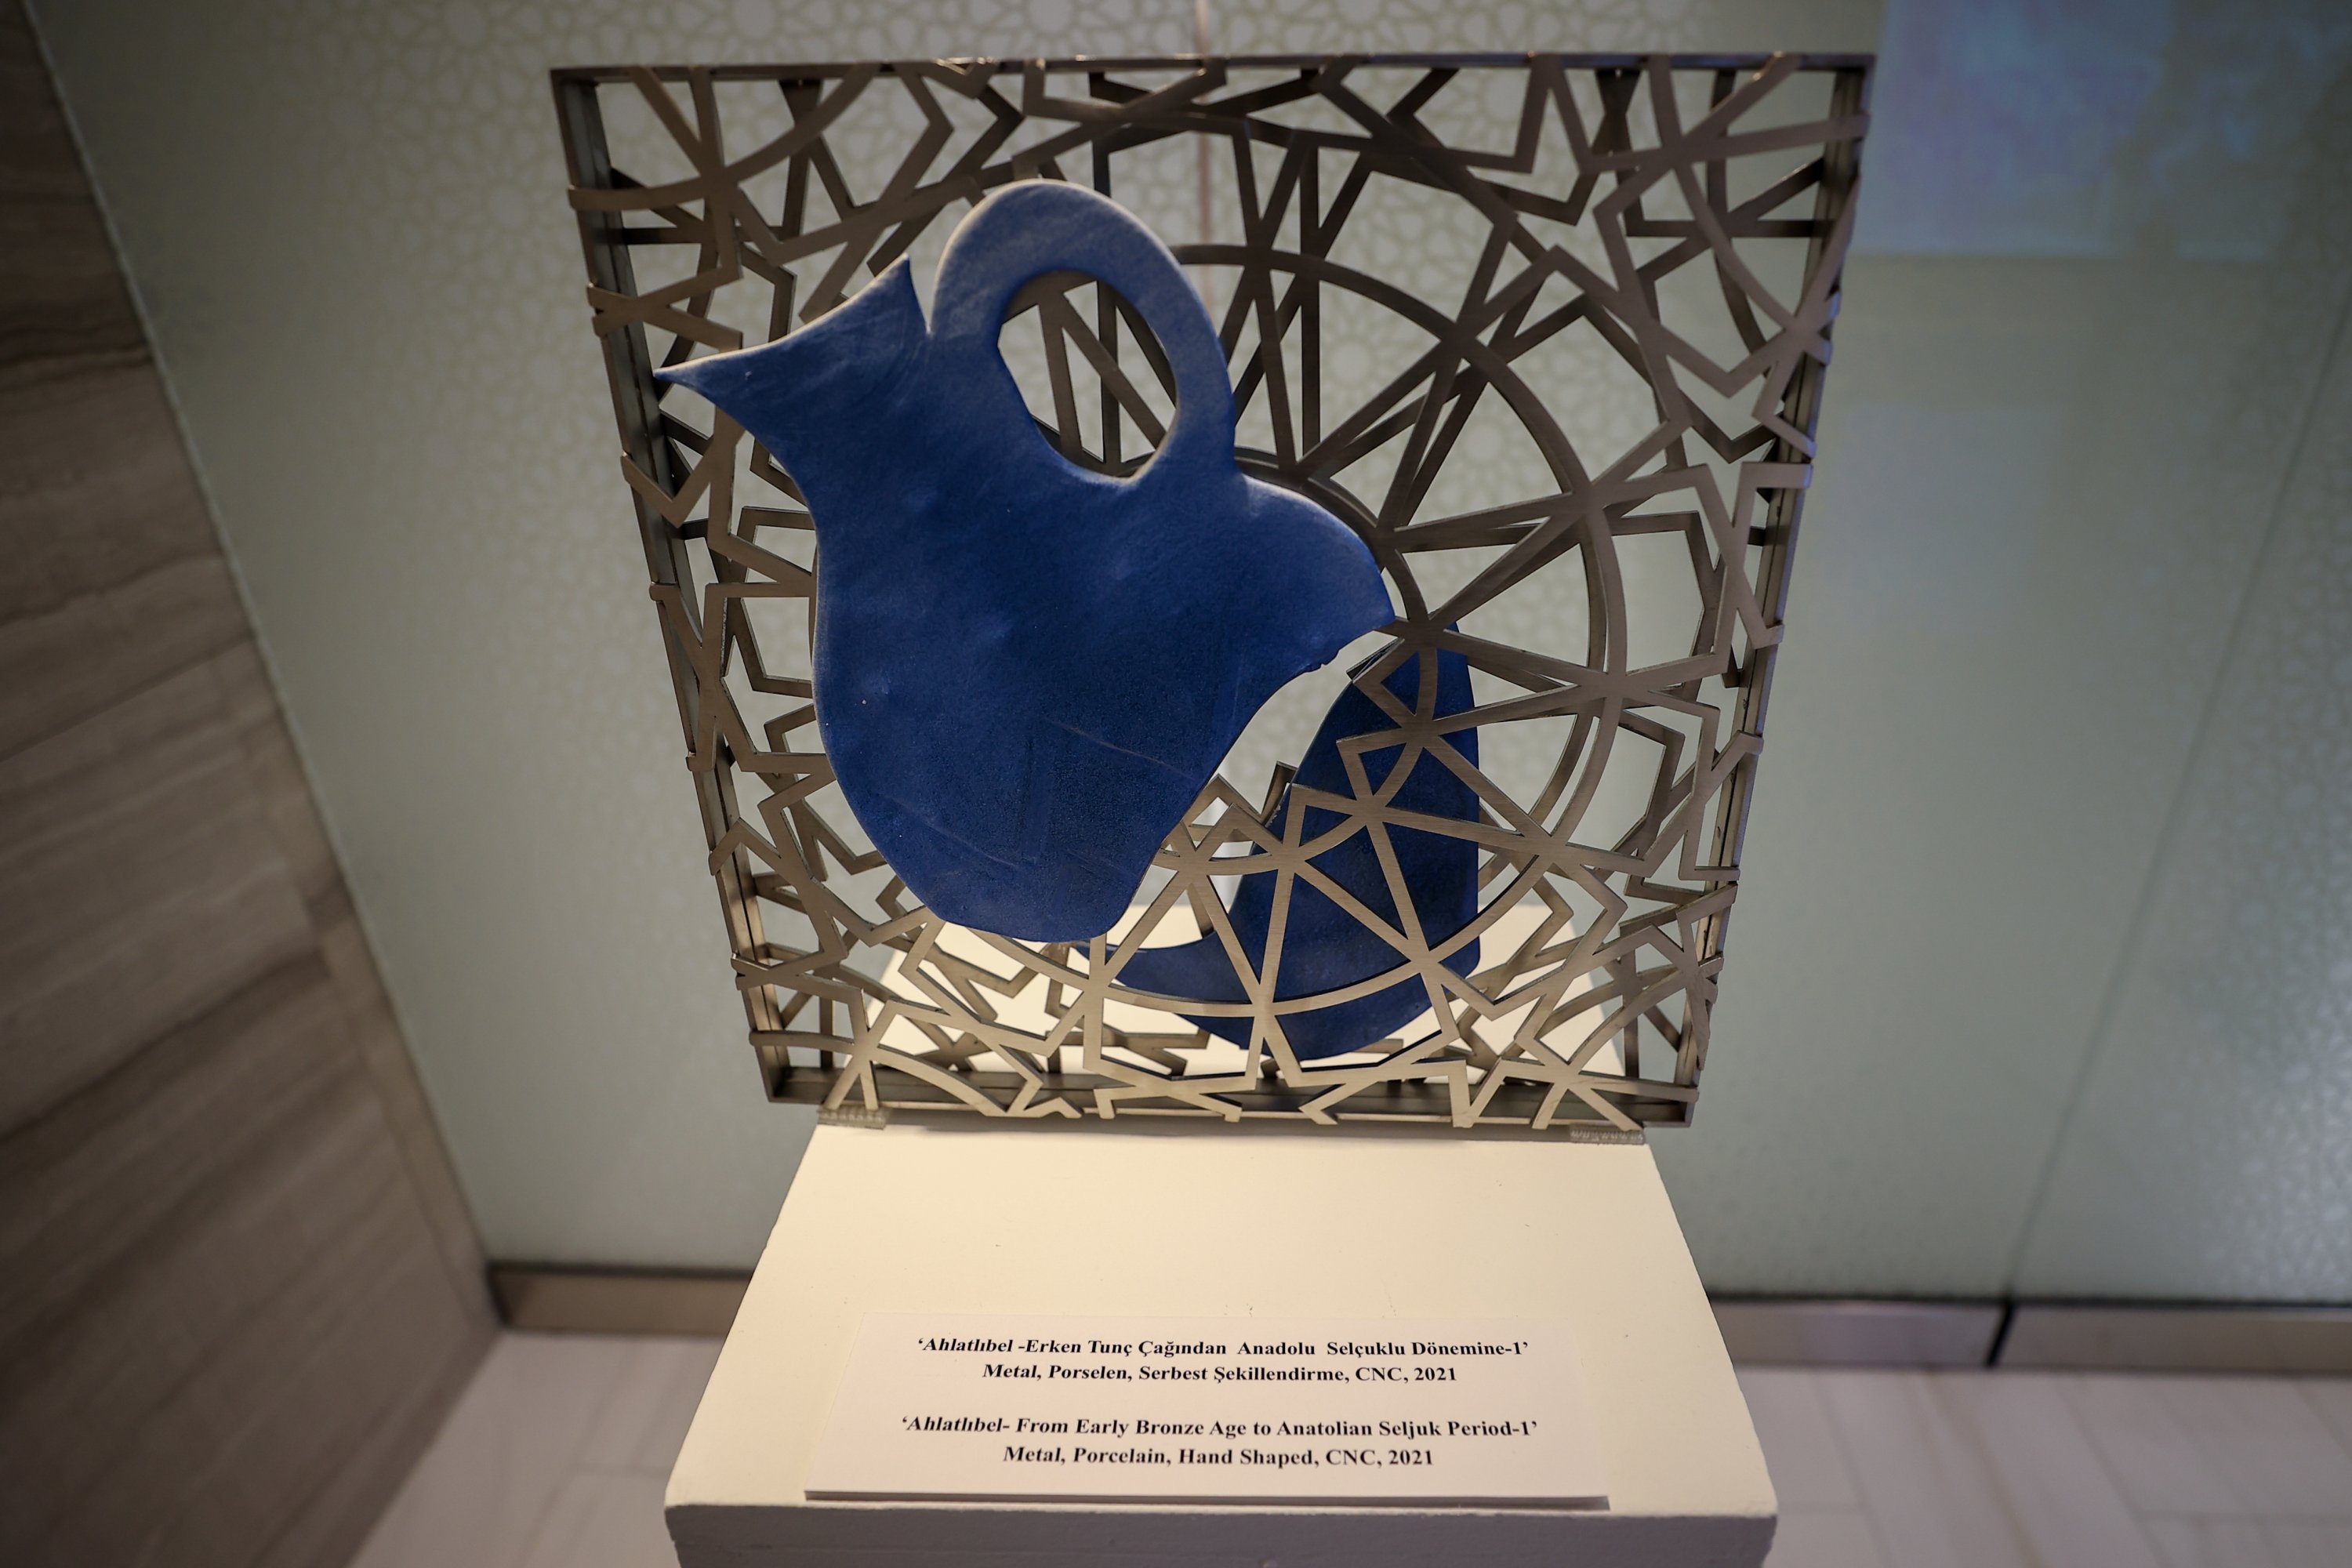 A ceramic work by artist Pınar Güzelgün Hangün on display at the "Beyond Layers" exhibition in Turkish House, New York, the U.S., Nov. 25, 2021. (AA Photo) 